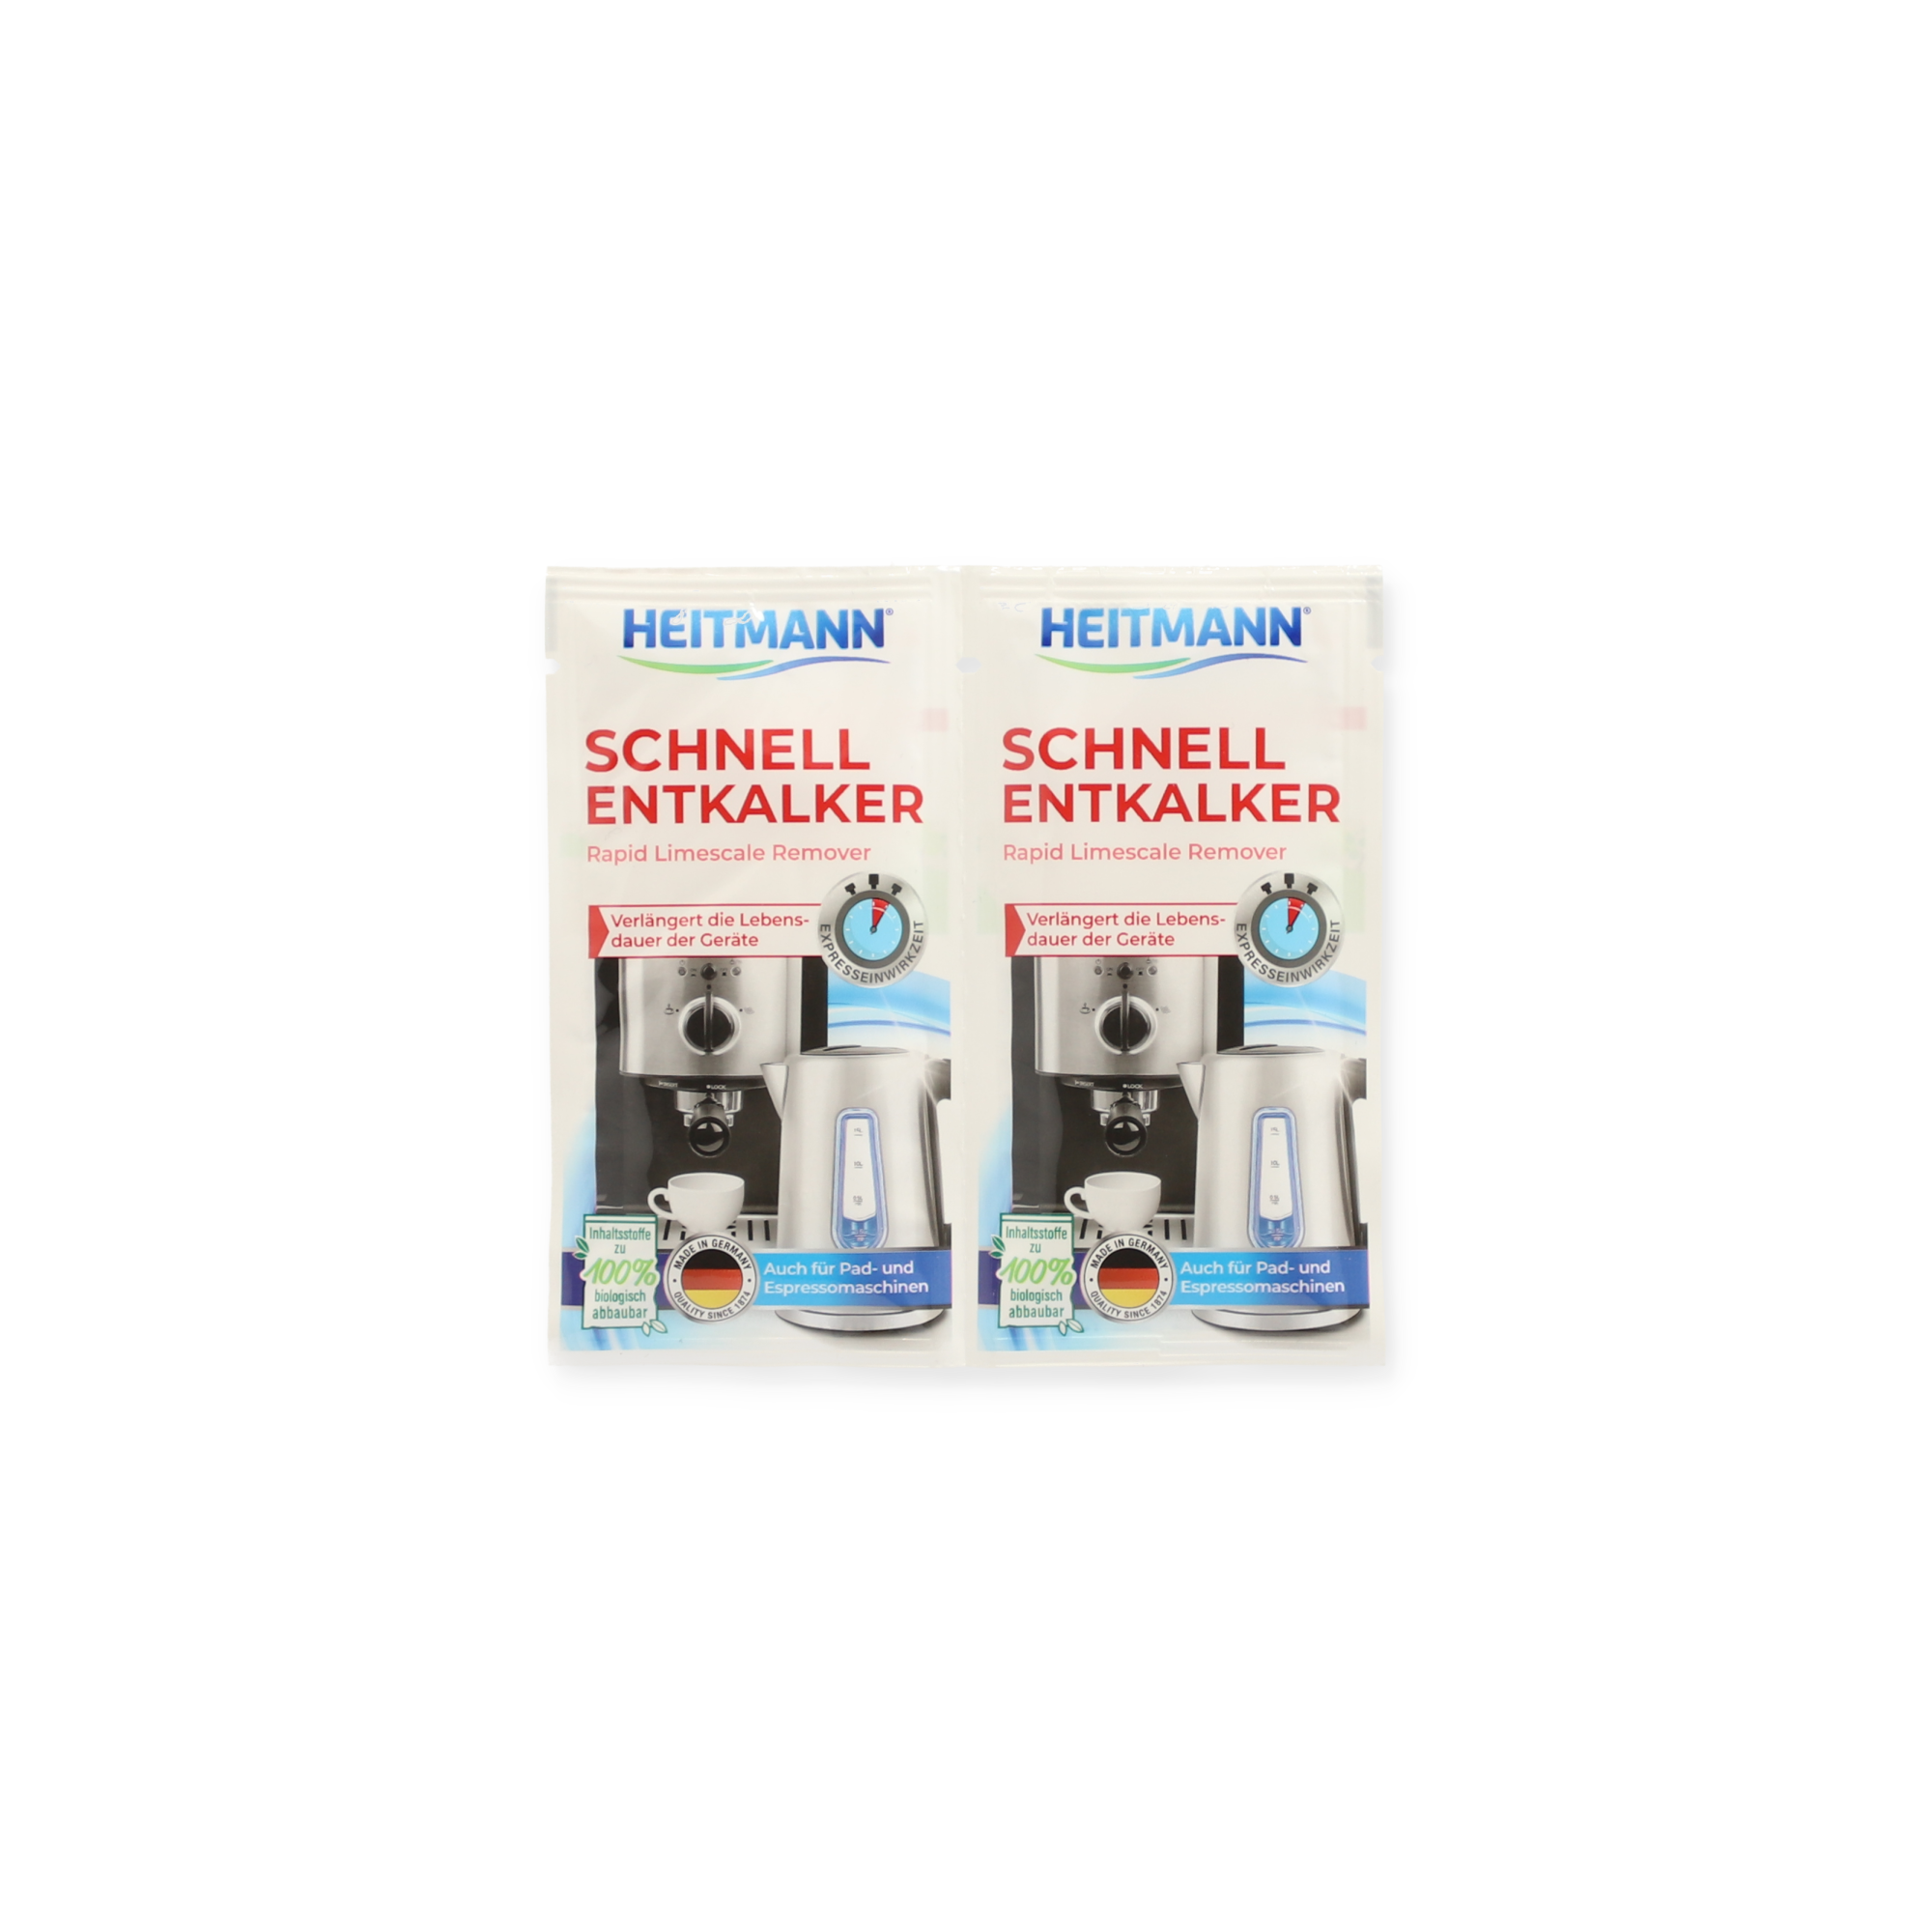 Schnell-Entkalker 2 x 15 g + product picture